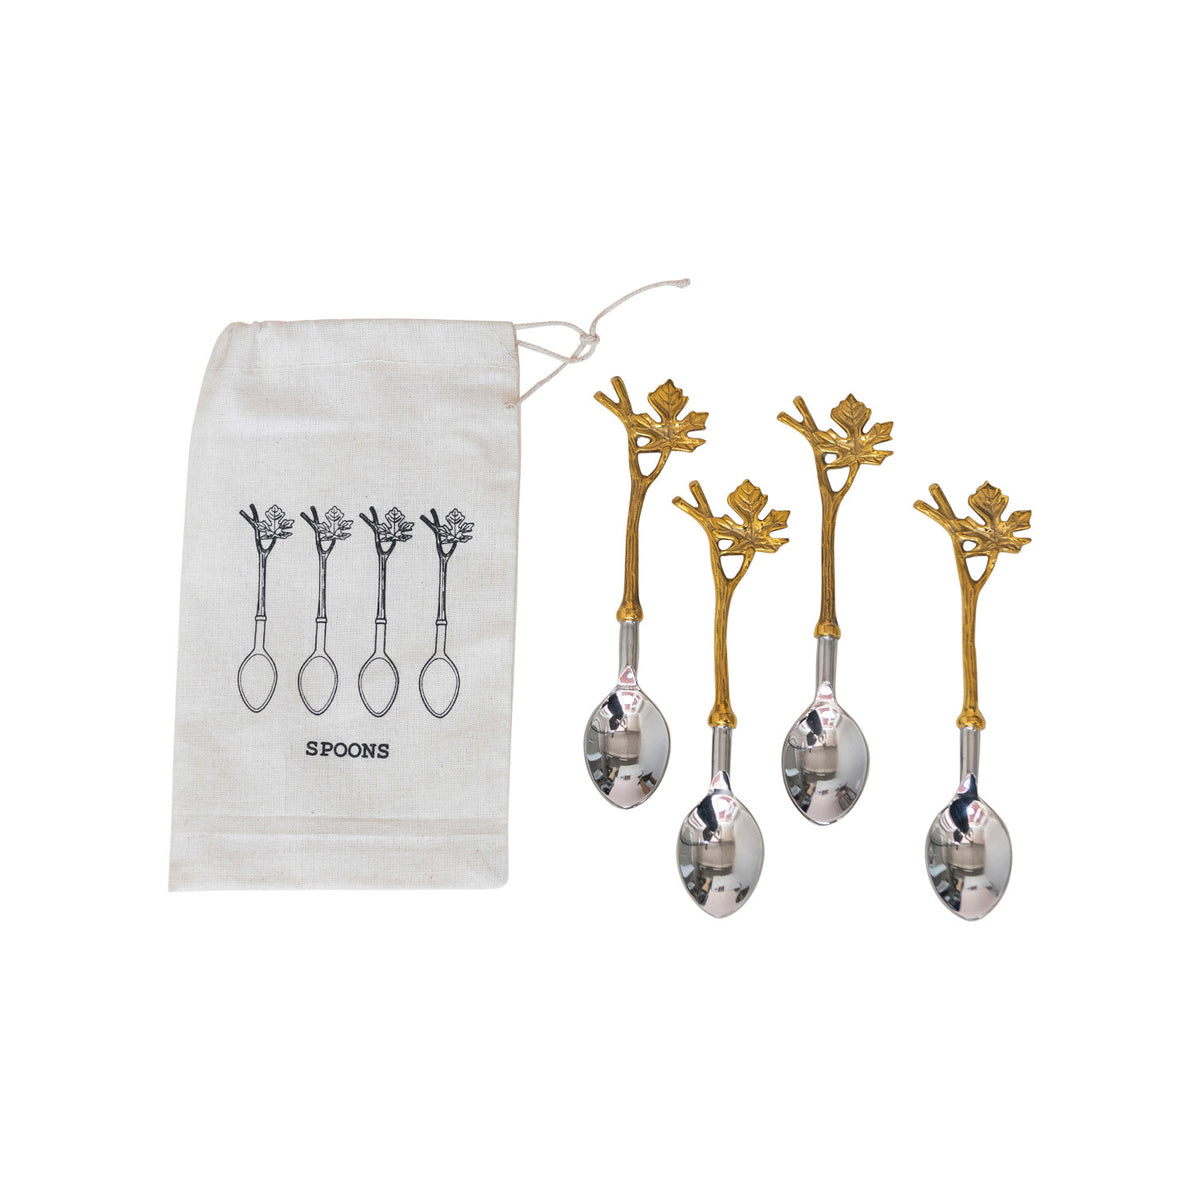 Maple Branch Stainless Steel Spoons